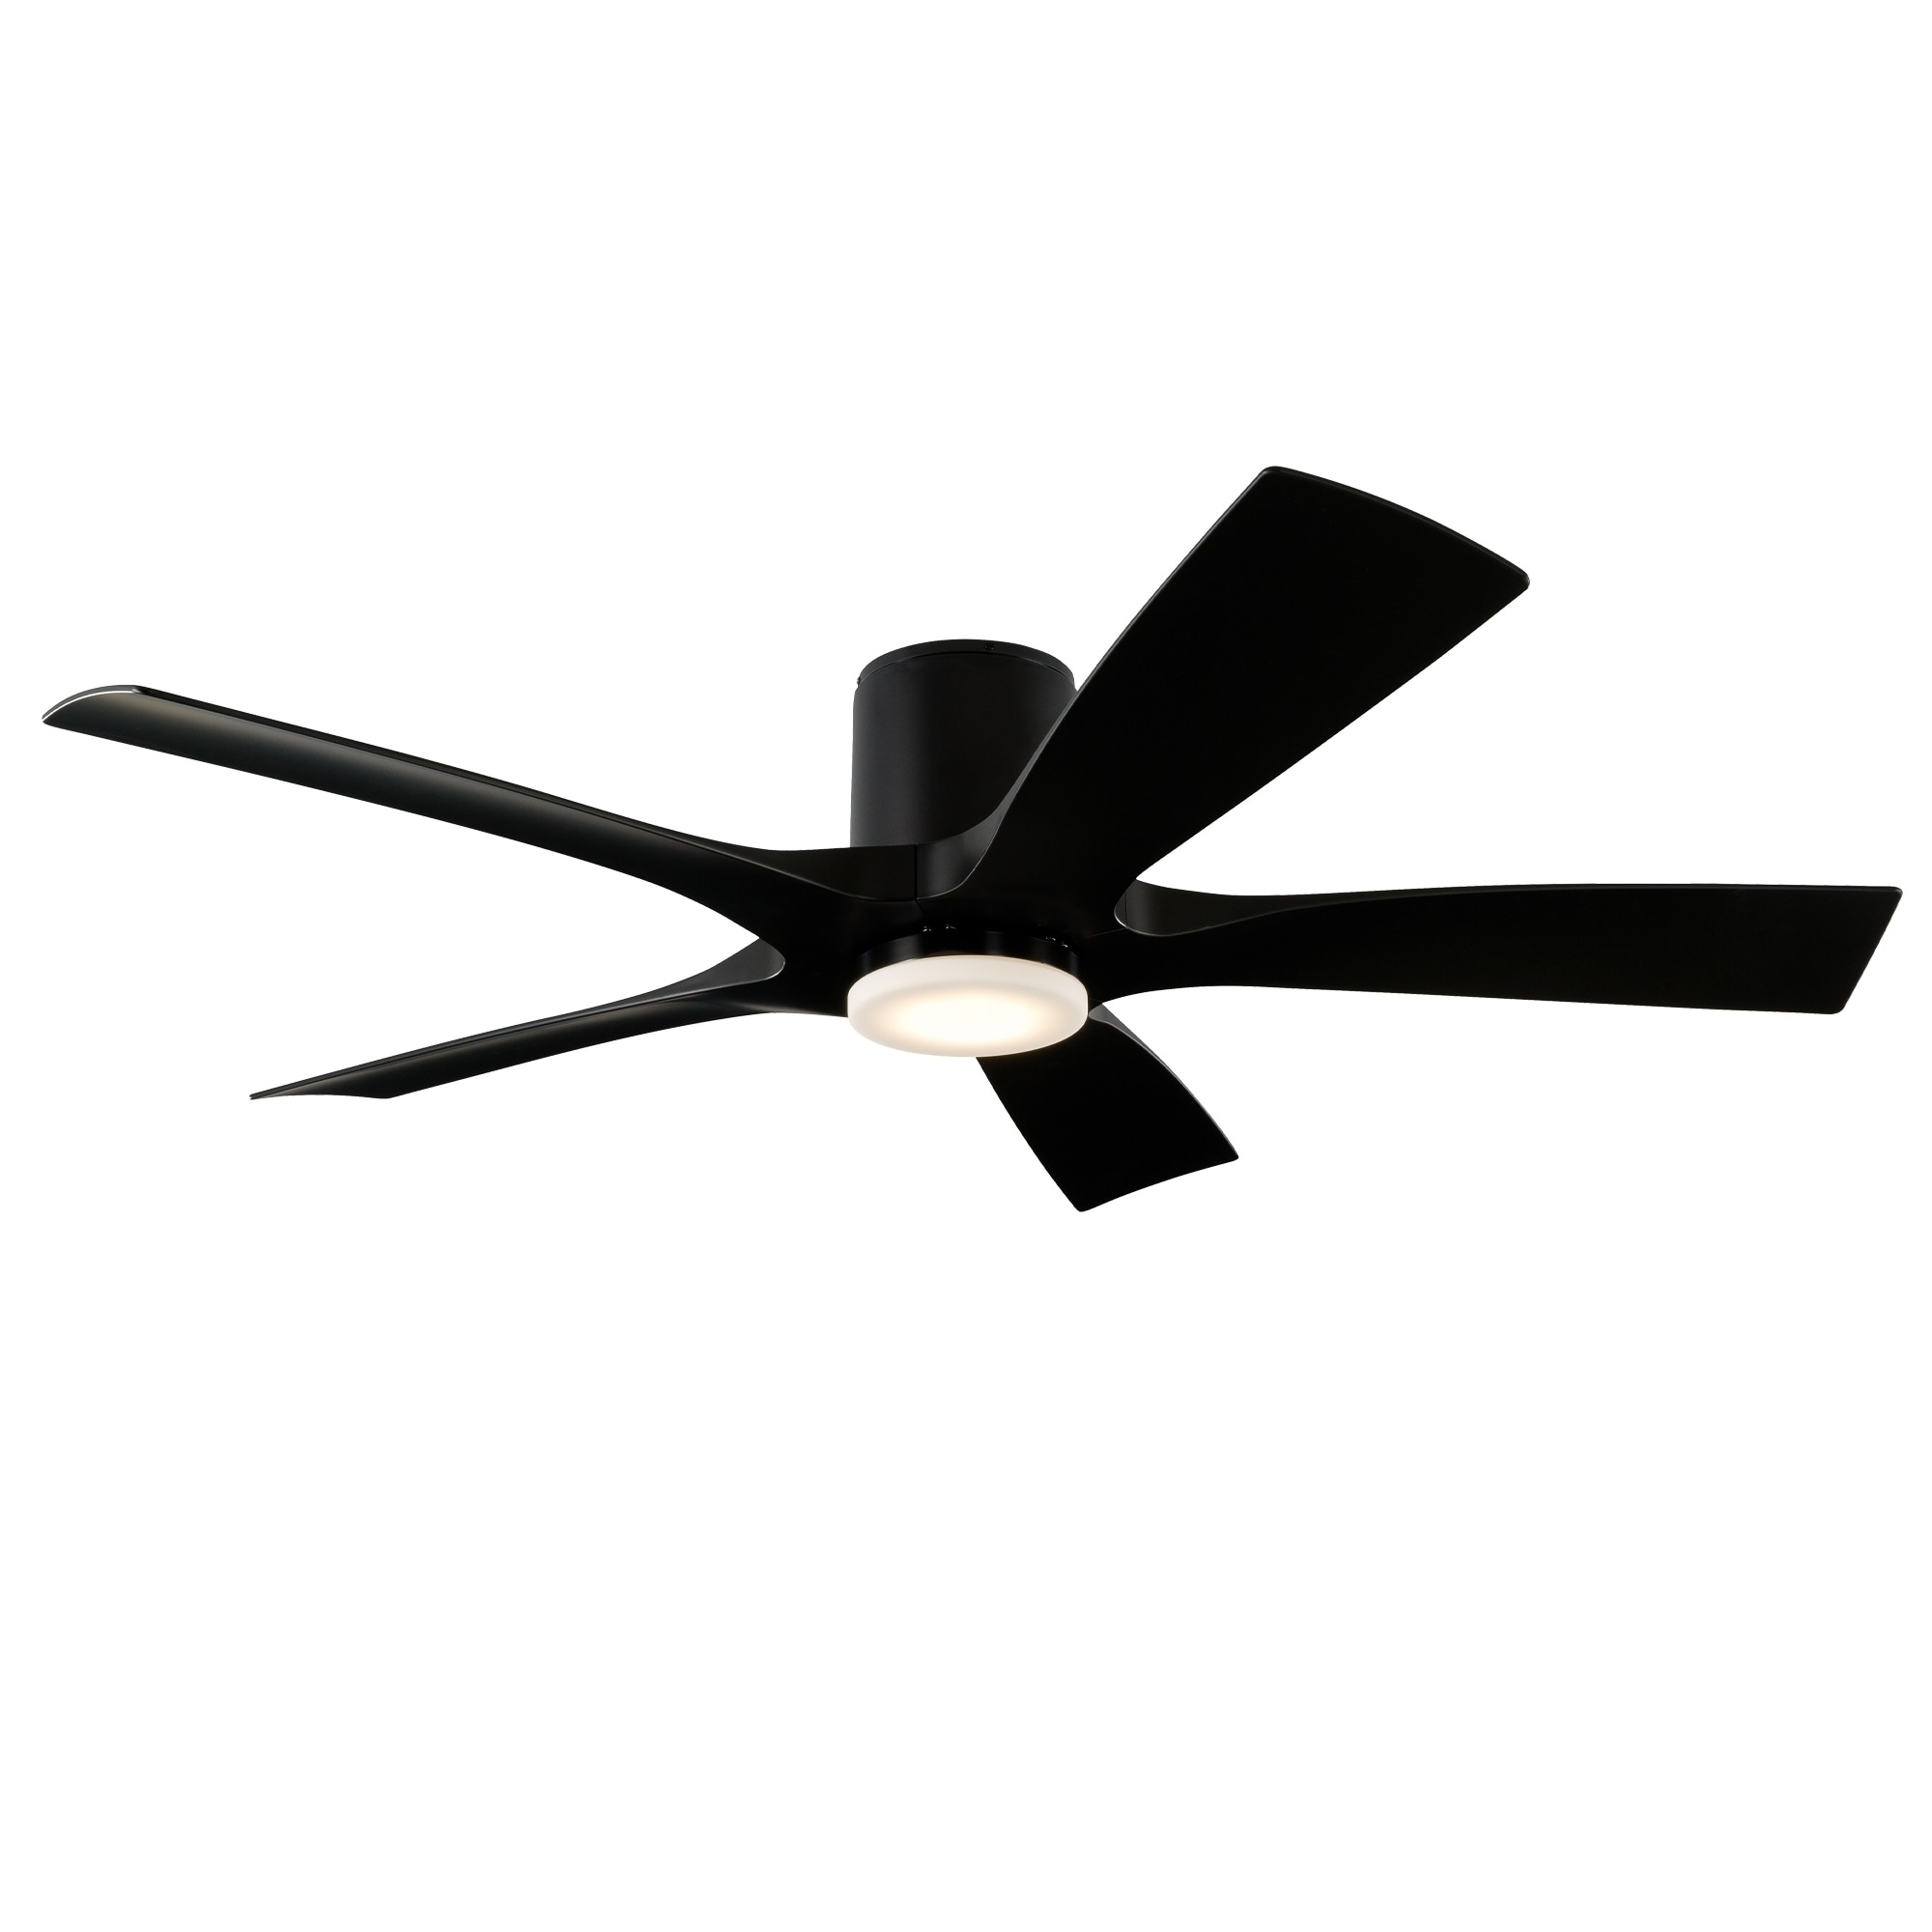 Light Kit Sold Separately Aviator Indoor and Outdoor 5-Blade Smart Flush Mount Ceiling Fan 54in Graphite Weathered Gray with Wall Control 